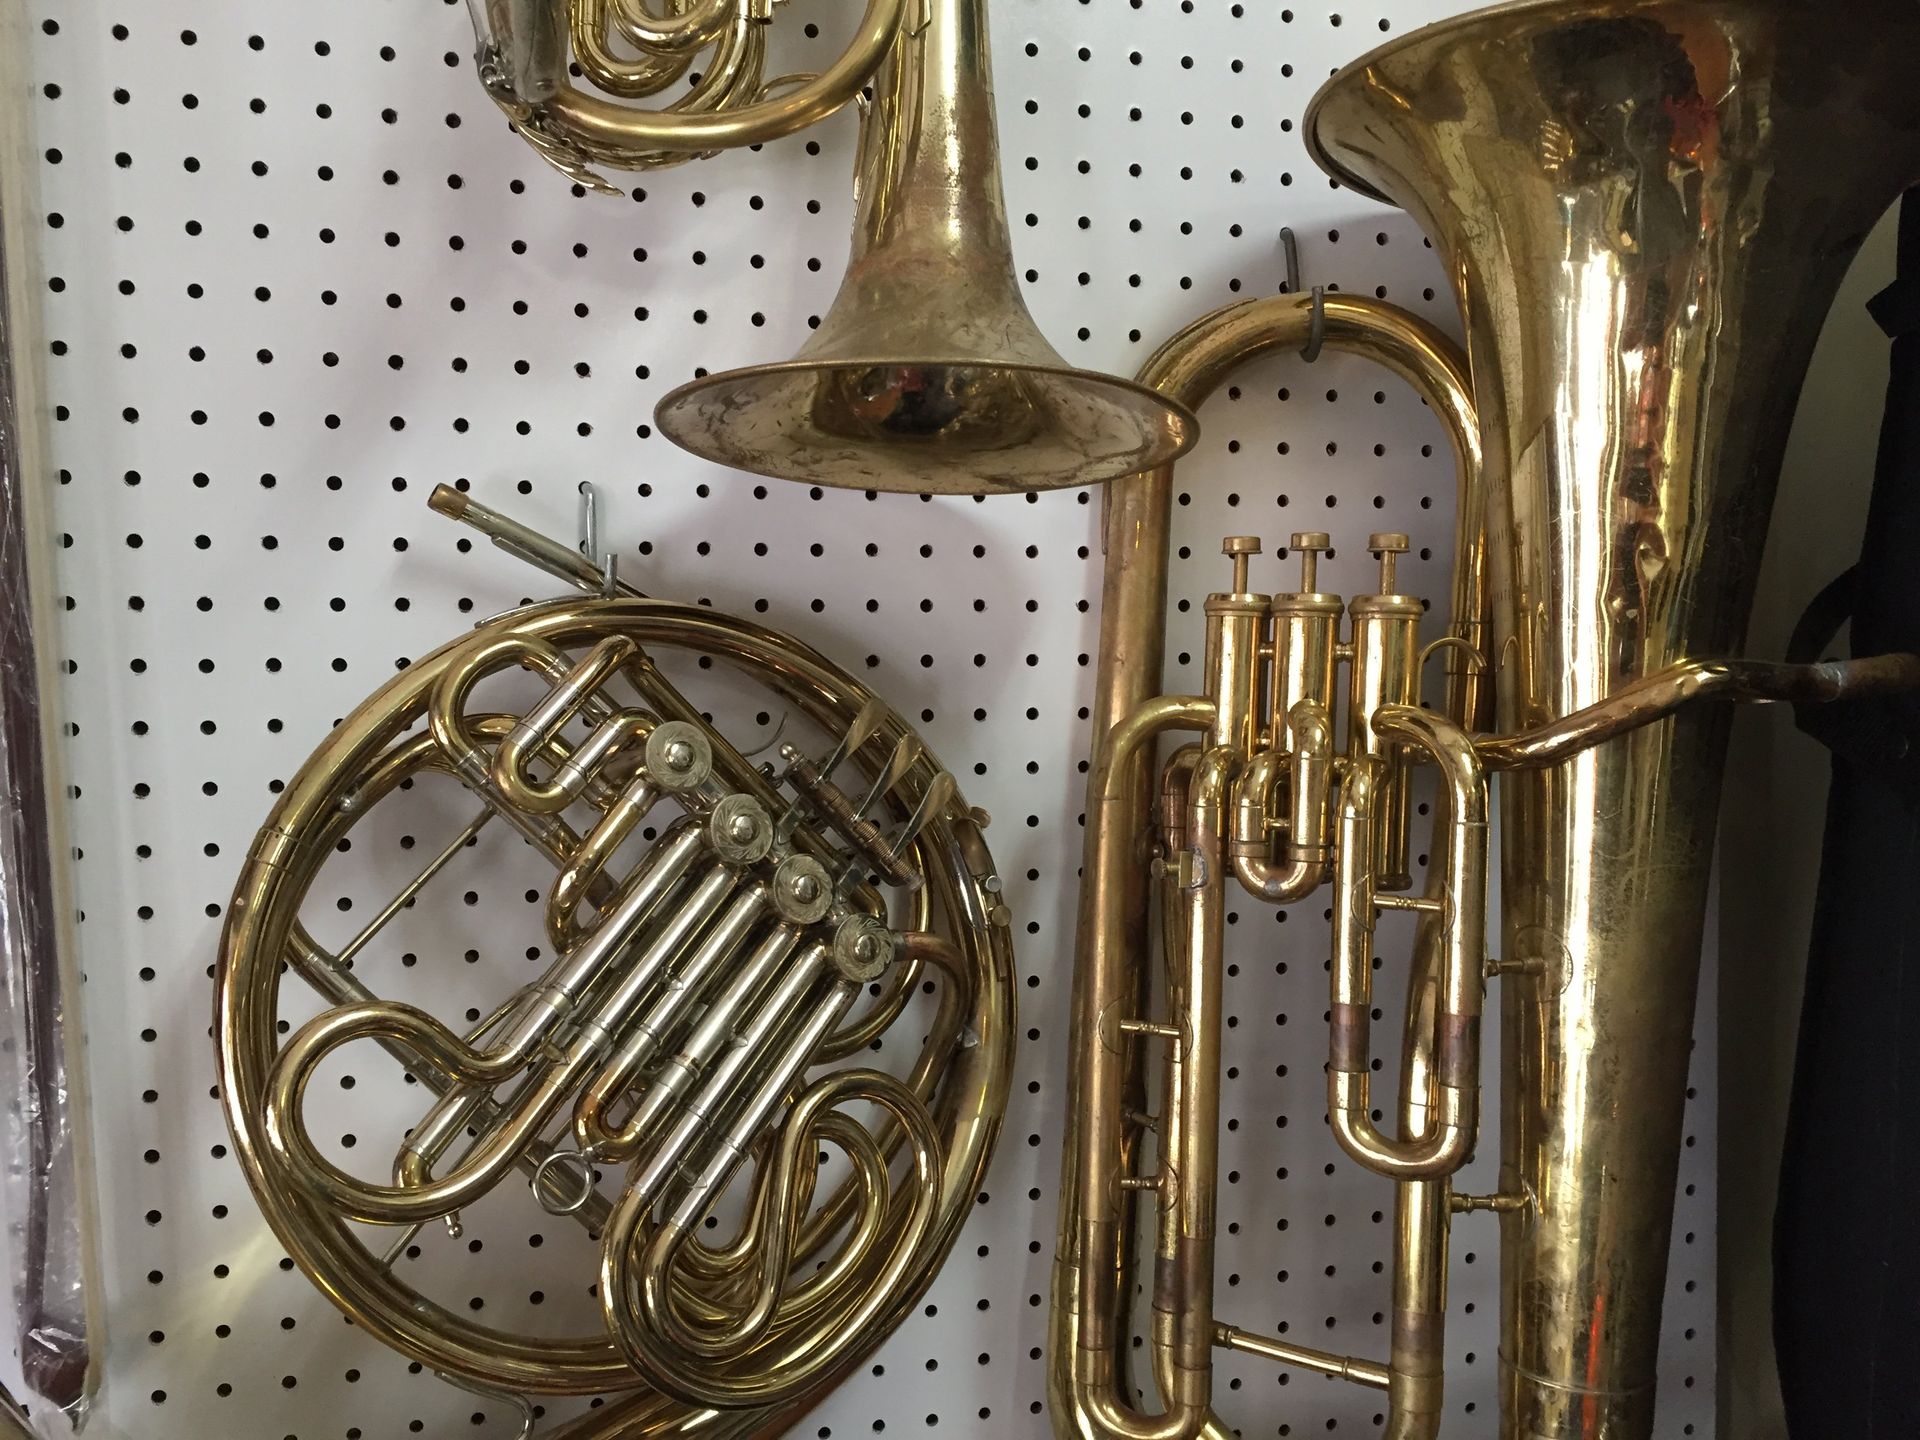 Brass Instruments for Sale - Hayes House of Music, Topeka ks